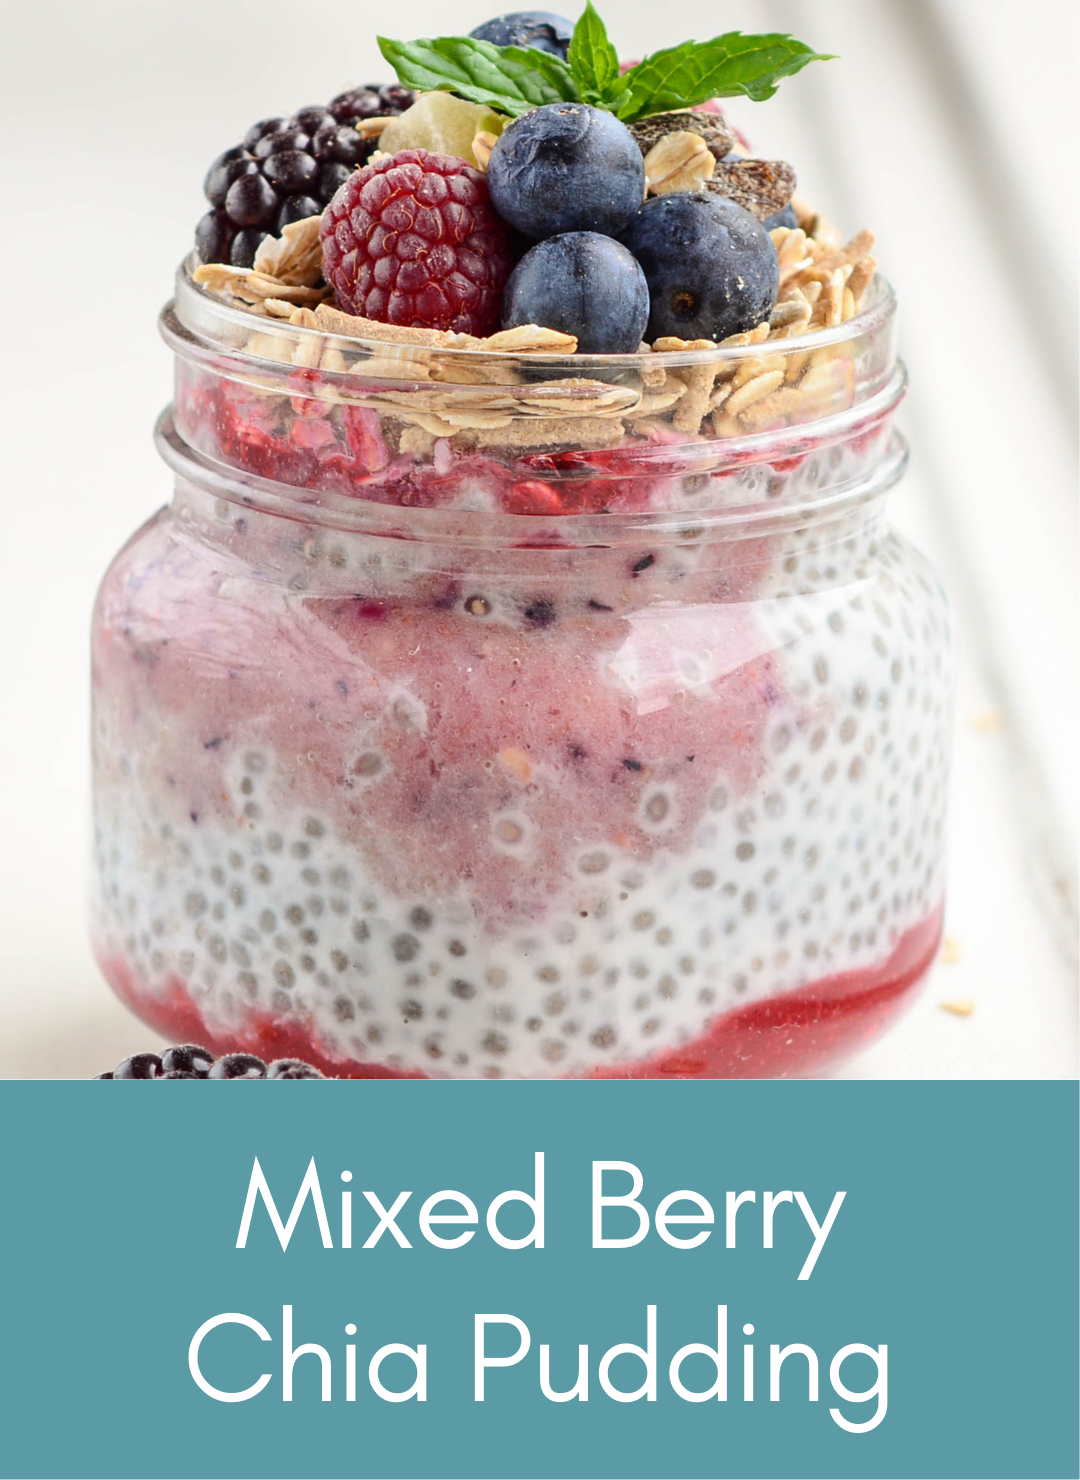 Mixed berry chia pudding Picture with link to recipe